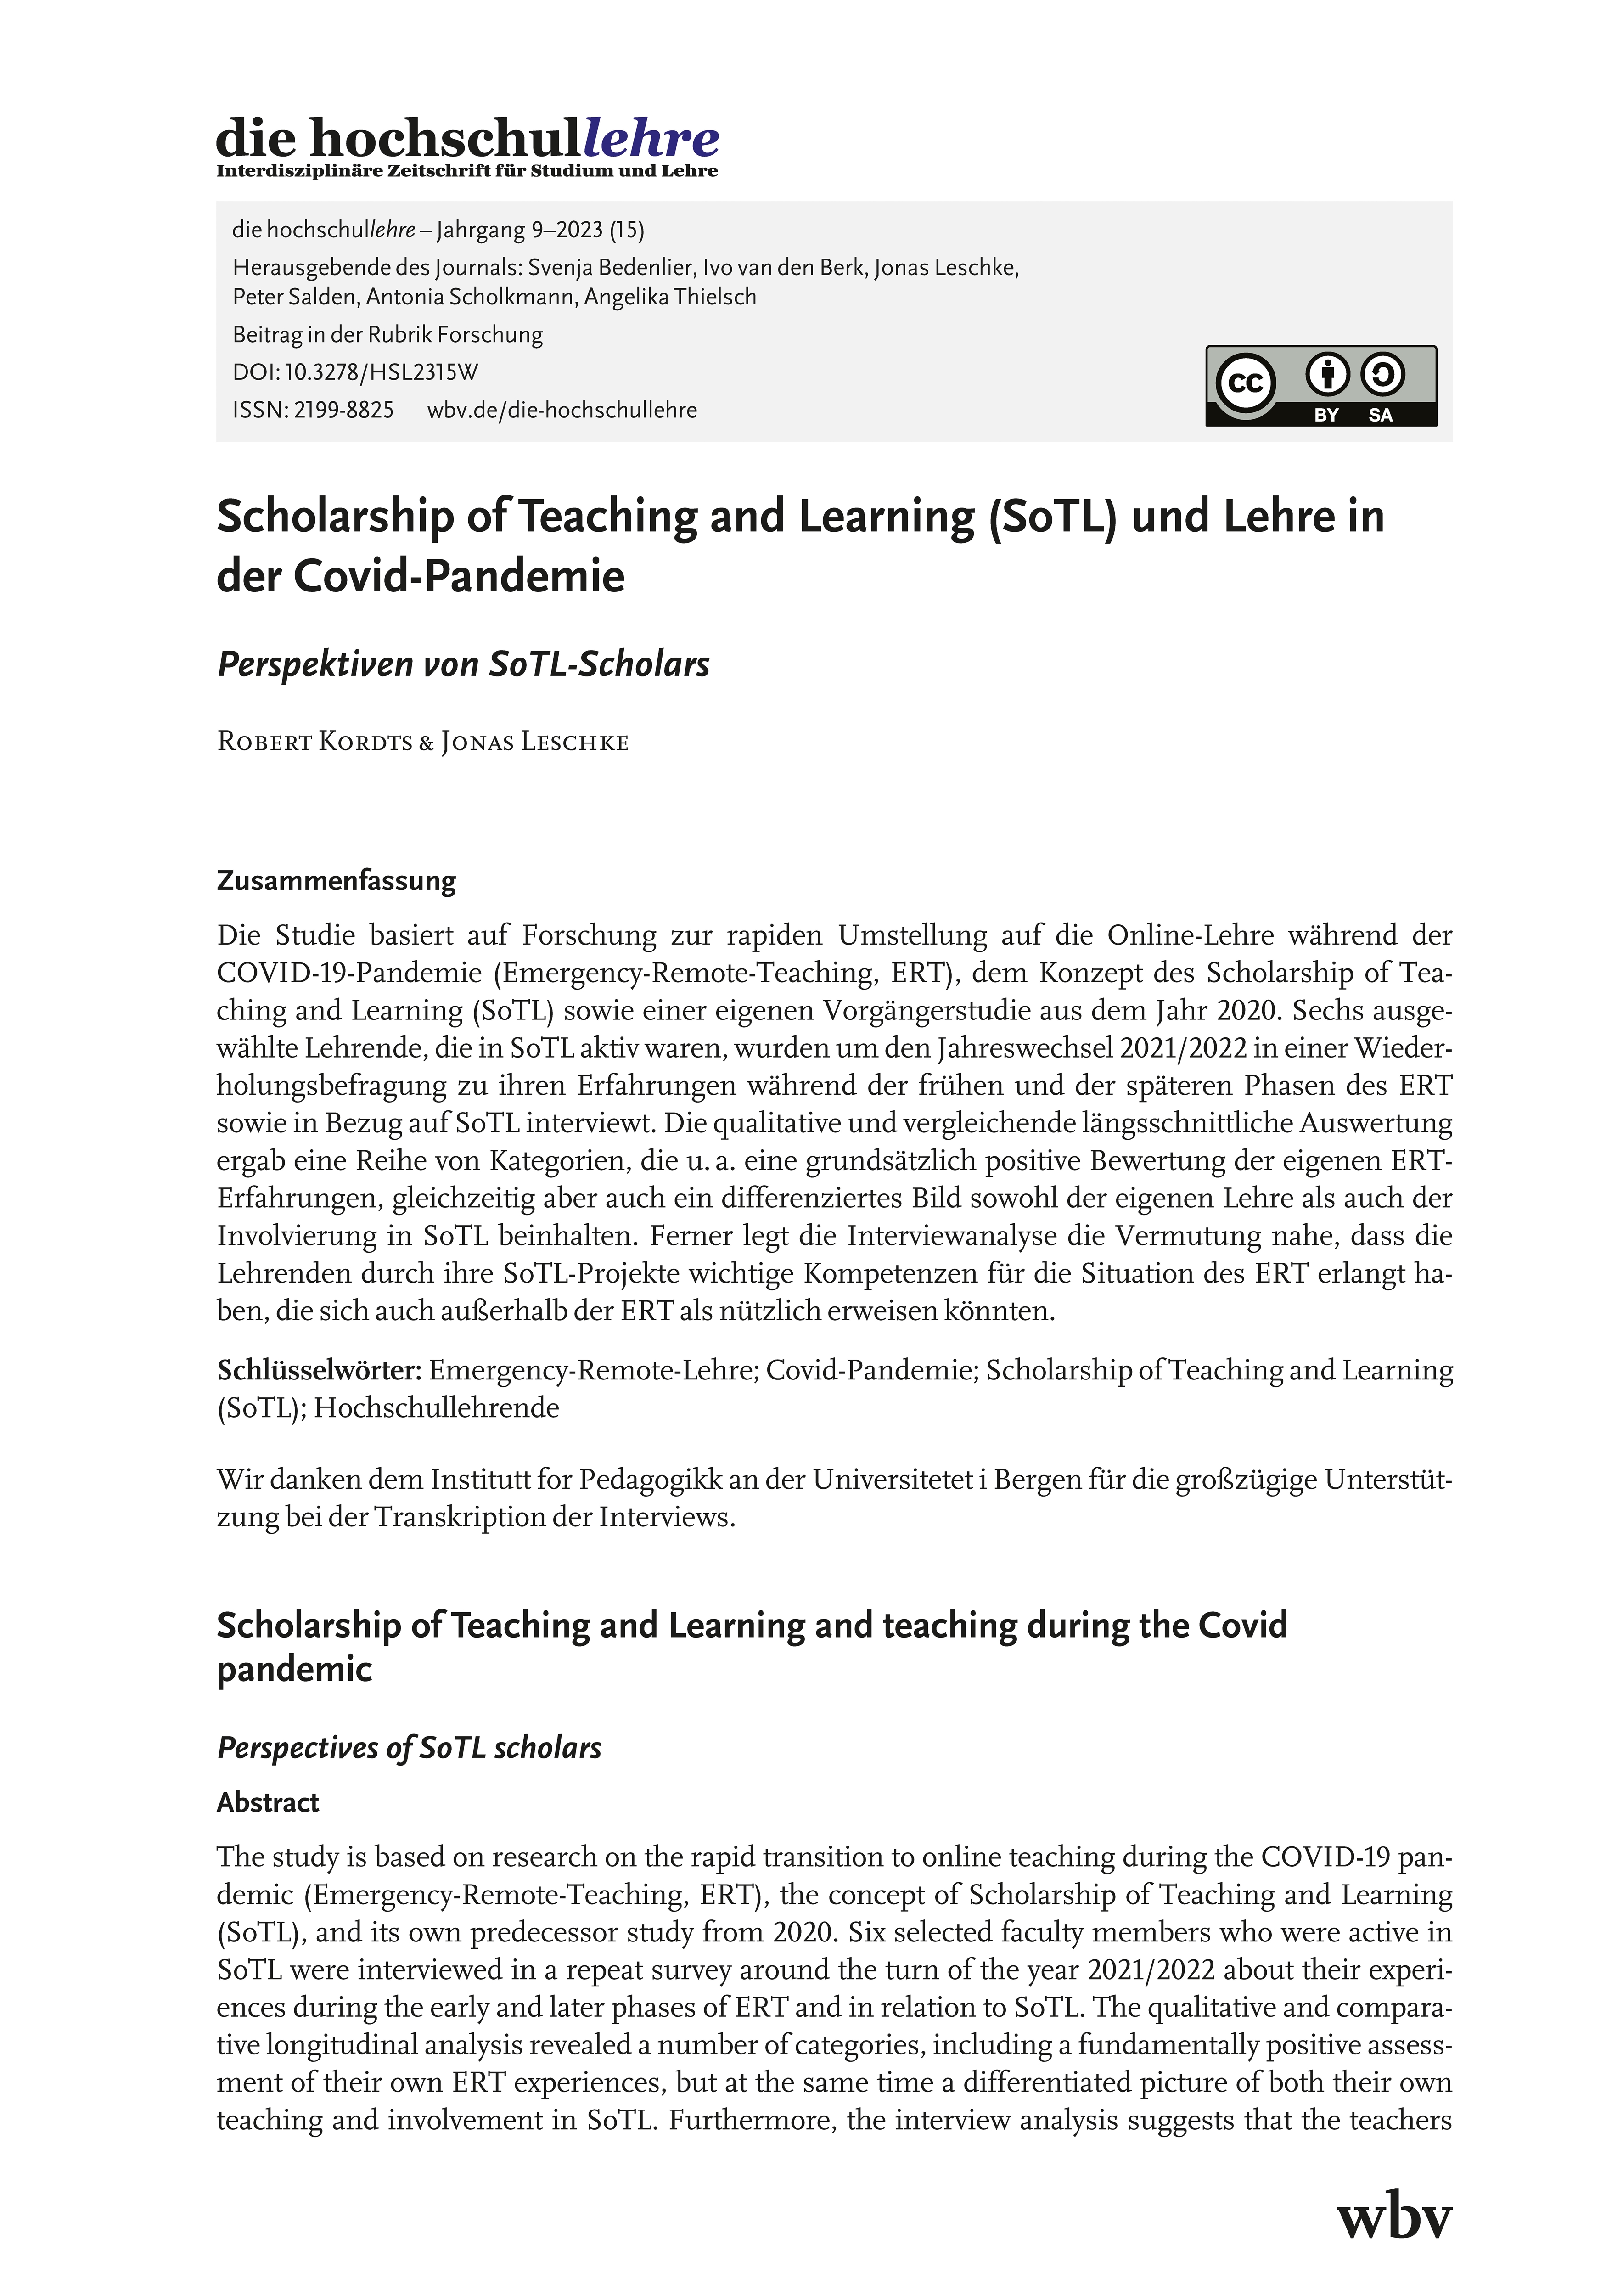 Scholarship of Teaching and Learning (SoTL) und Lehre in der Covid-Pandemie. Perspektiven von SoTL-Scholars